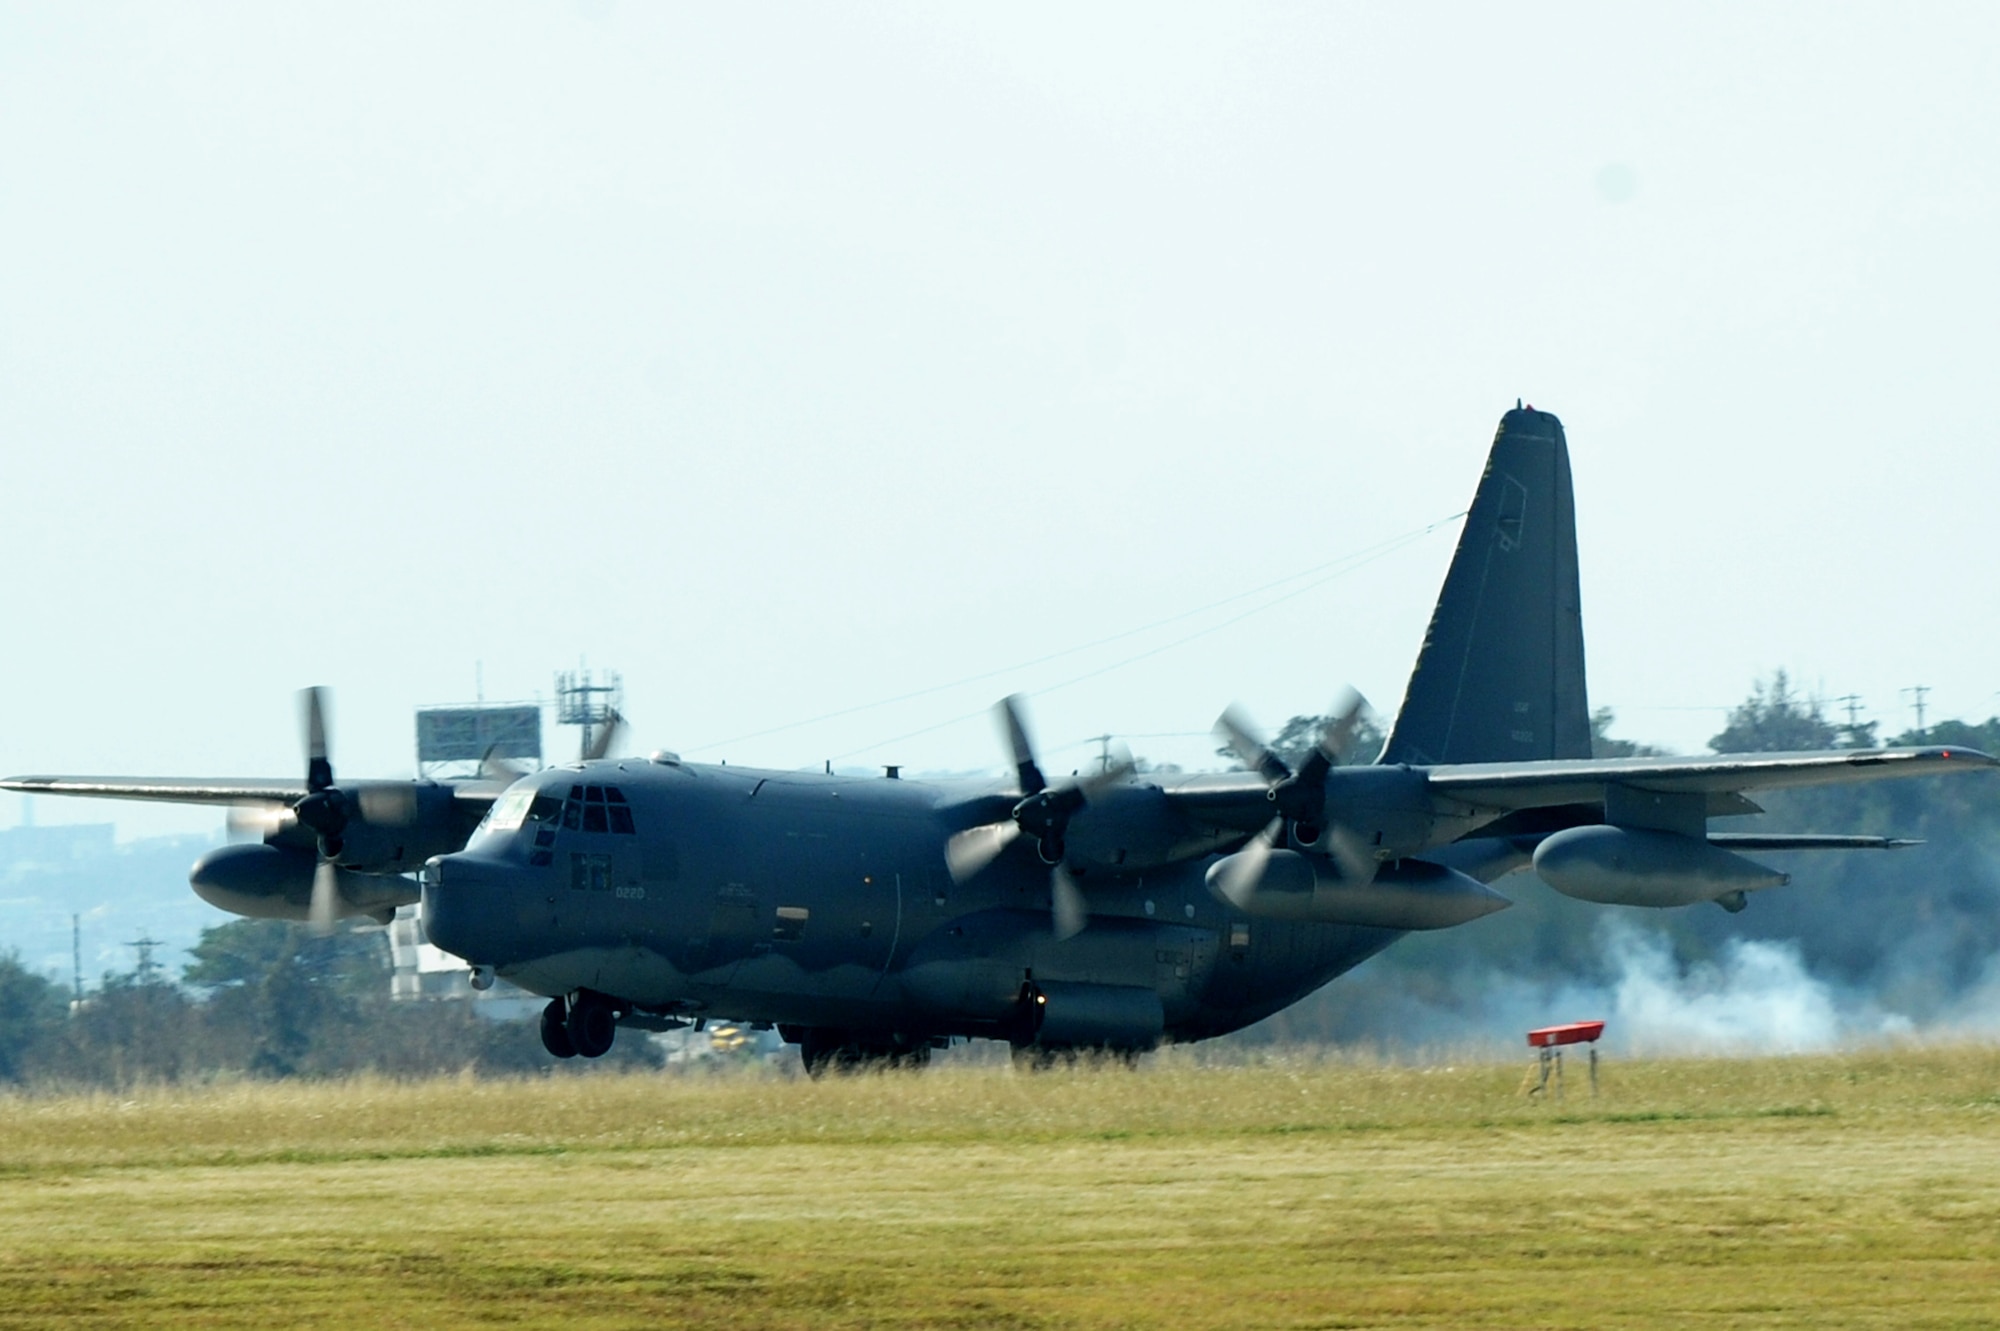 An MC-130P Combat Shadow aircraft lands on Kadena Air Base, Okinawa, Japan, Oct. 16,2014. The aircraft flew in a four-ship formation to mark its retirement. (U.S. Air Force photo by Stephen G. Eigel)